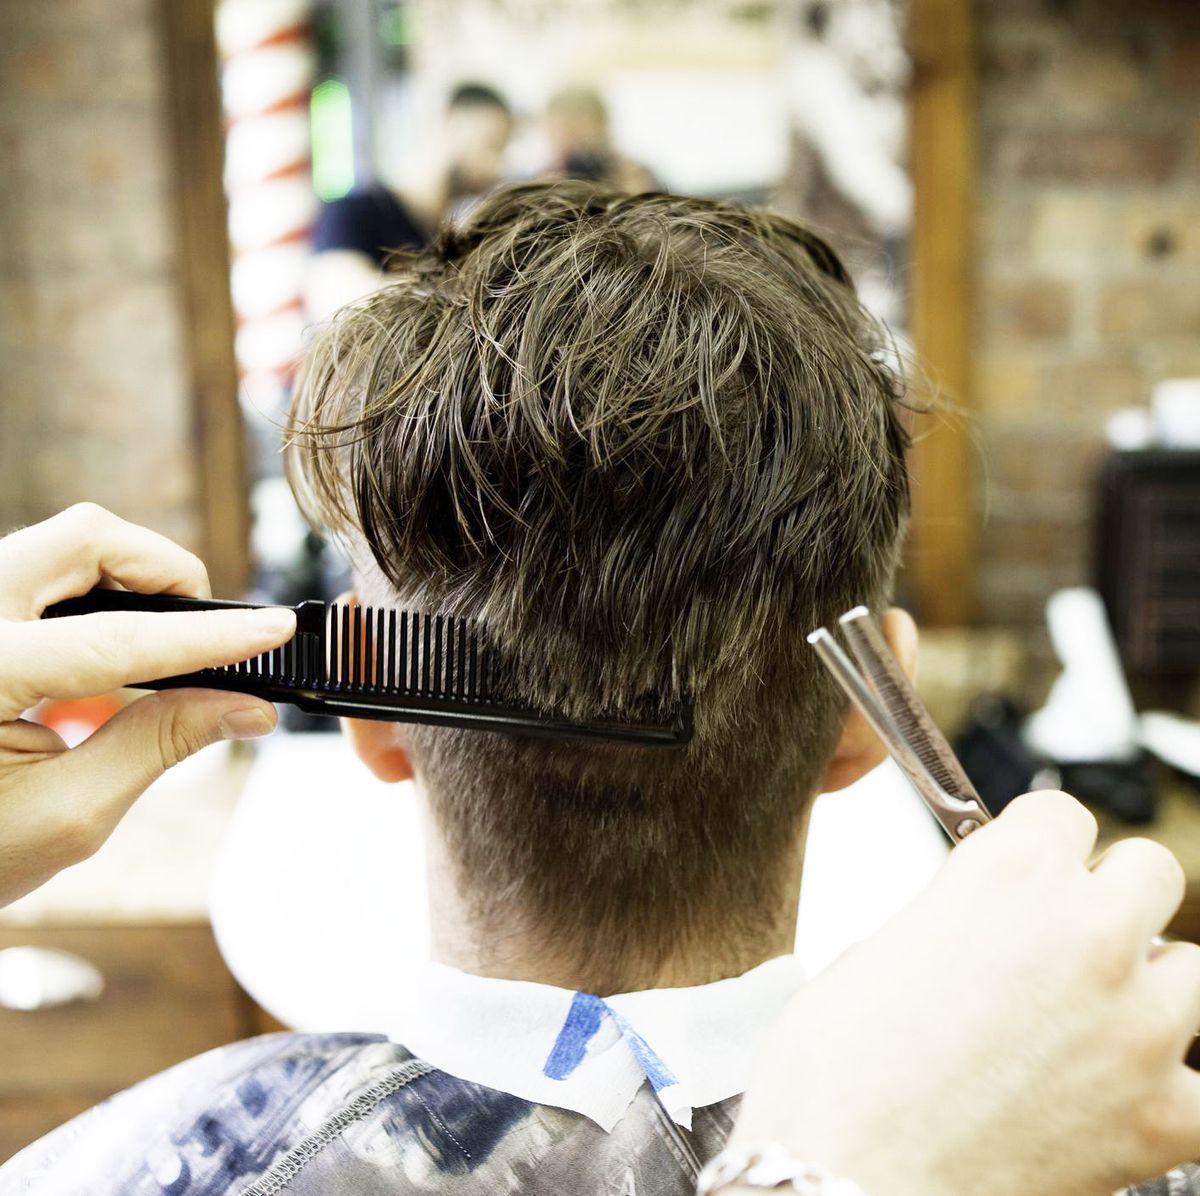 Is an Expensive Haircut Worth It? - How Much Men Should Pay